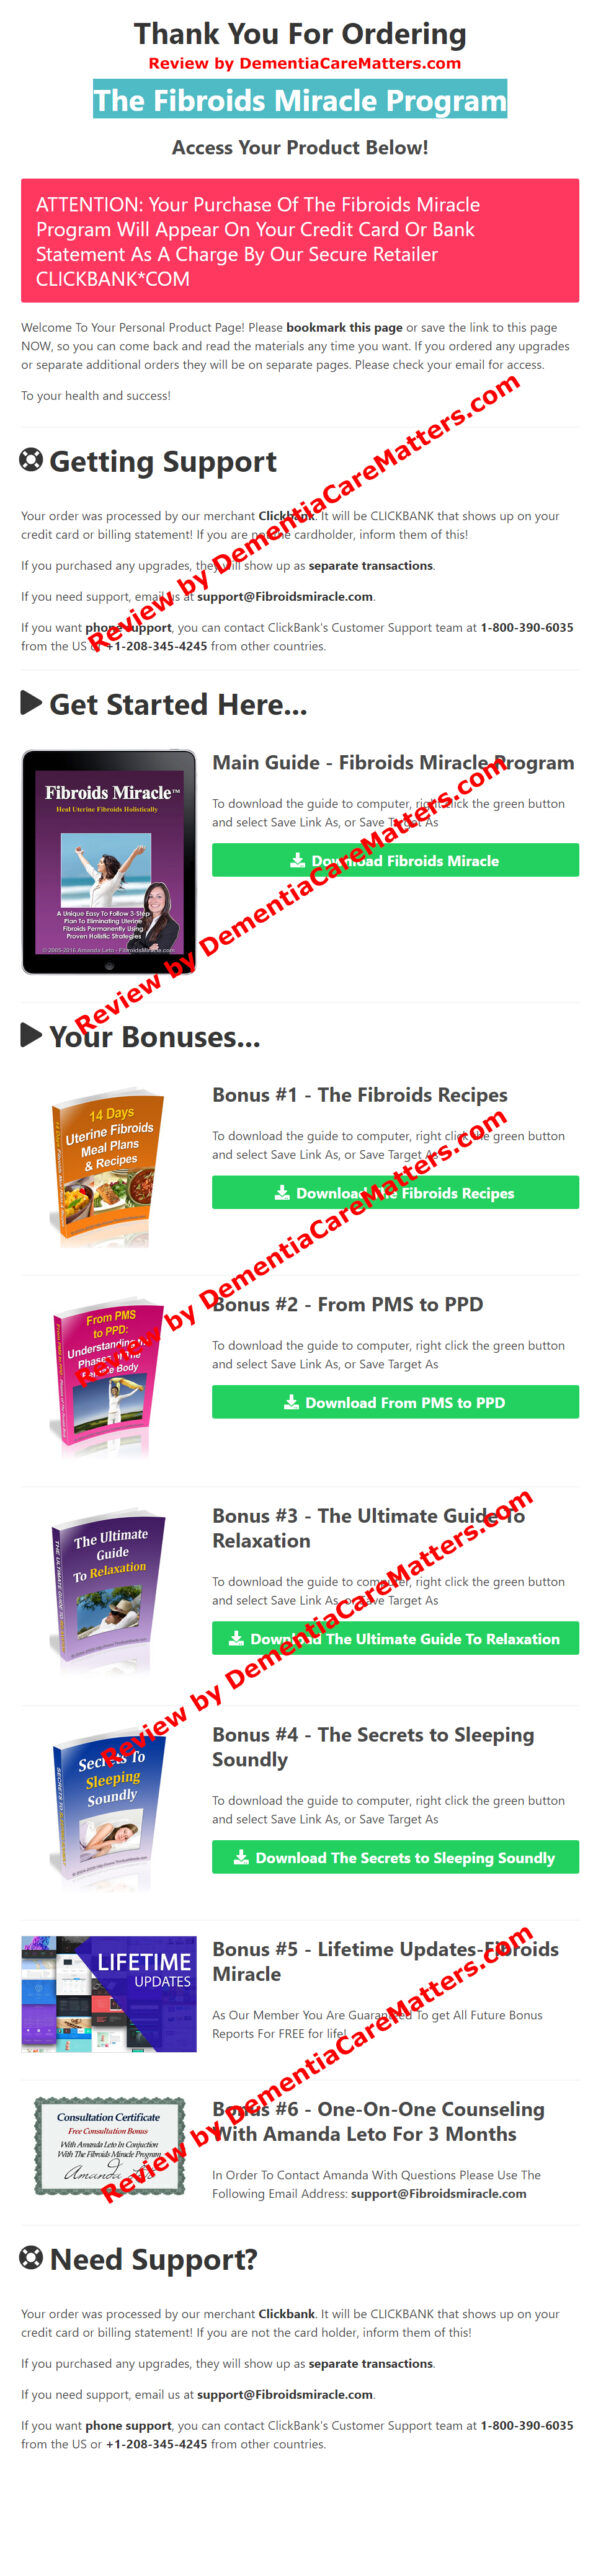 Fibroids Miracle Download Page